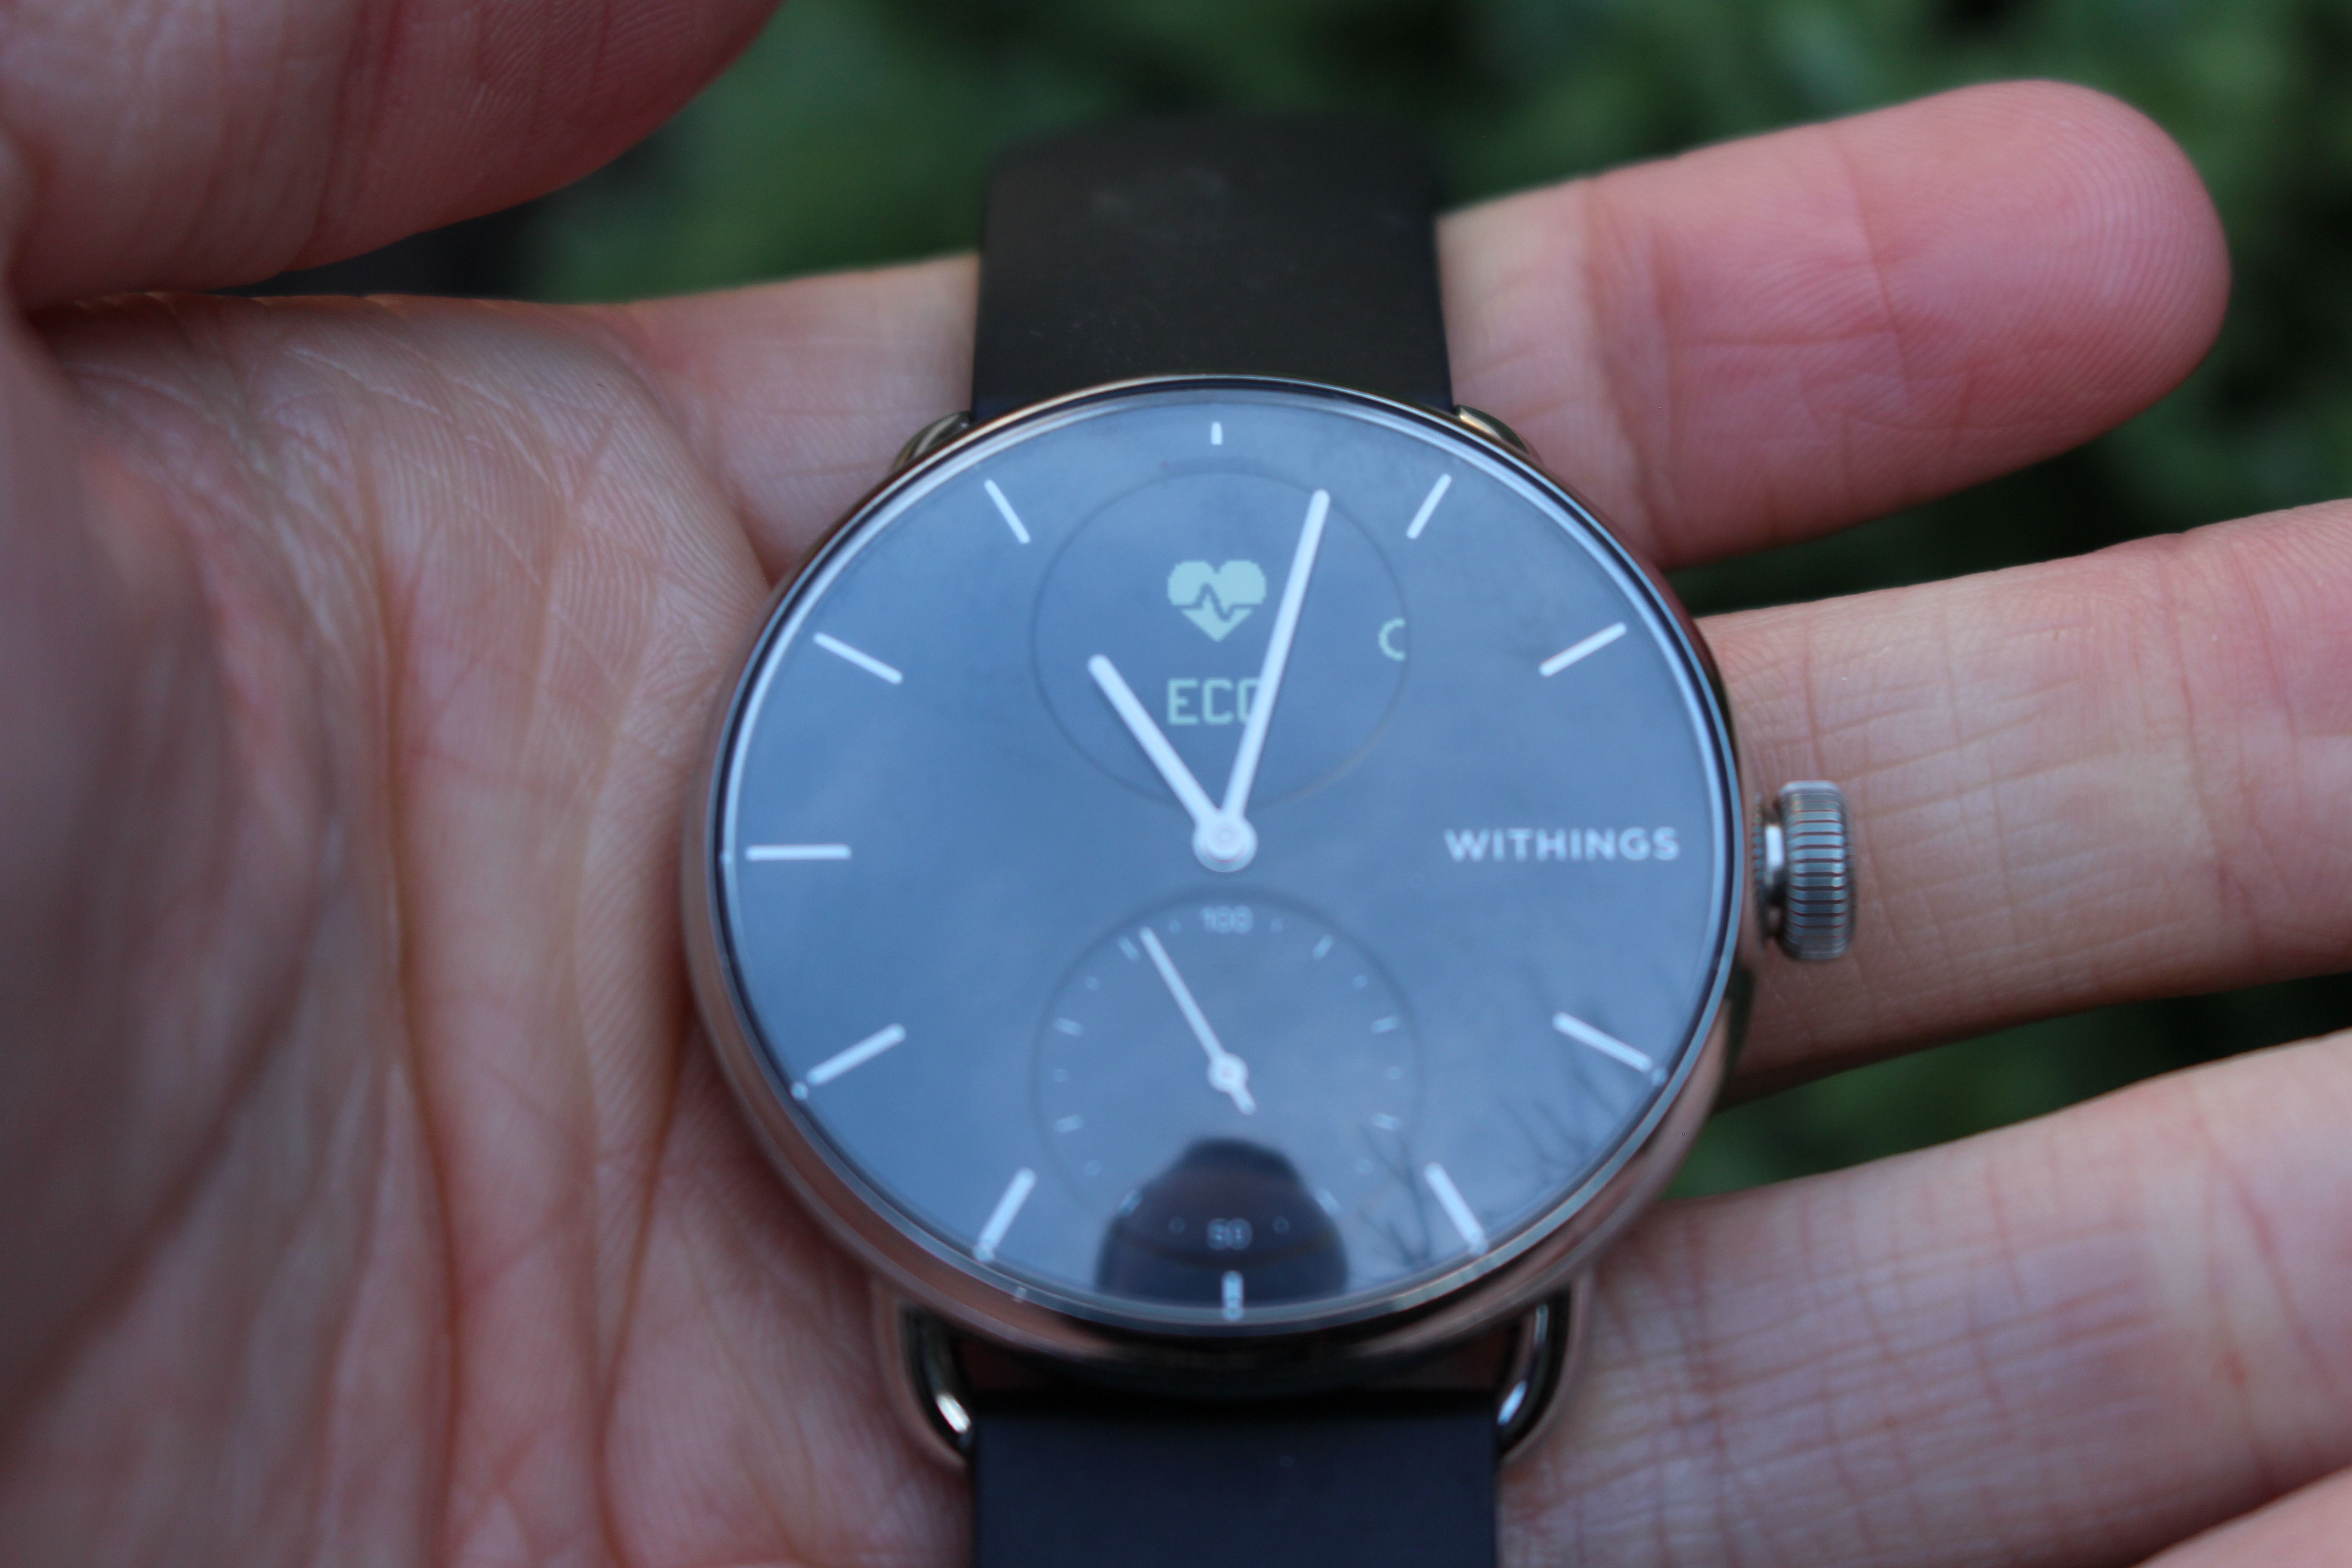 Withings ScanWatch watch face